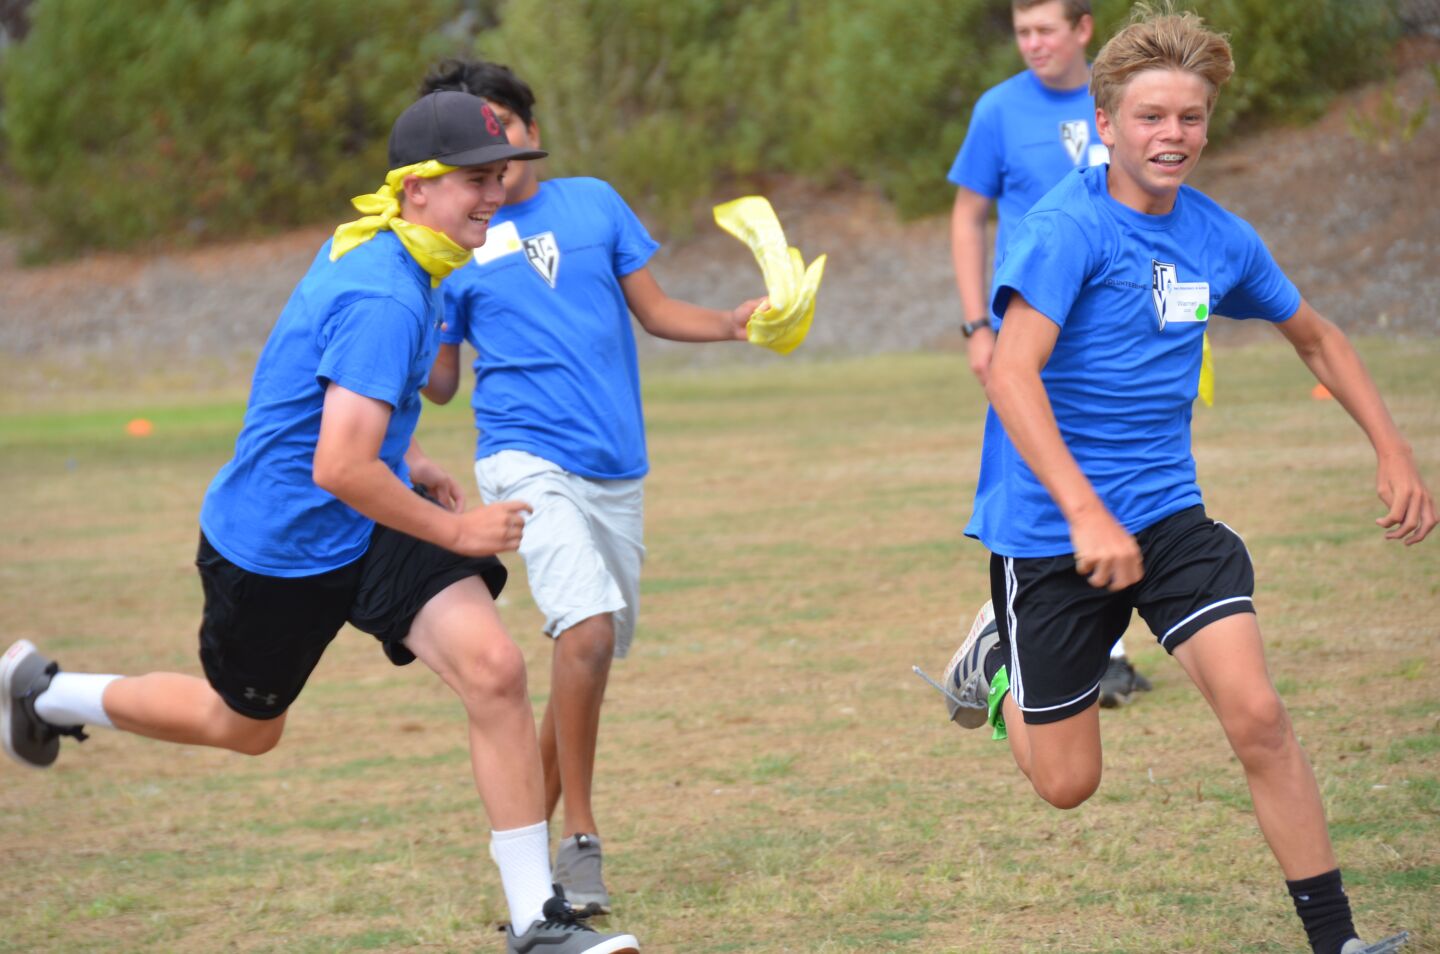 “Capture the Flag” participants in action.